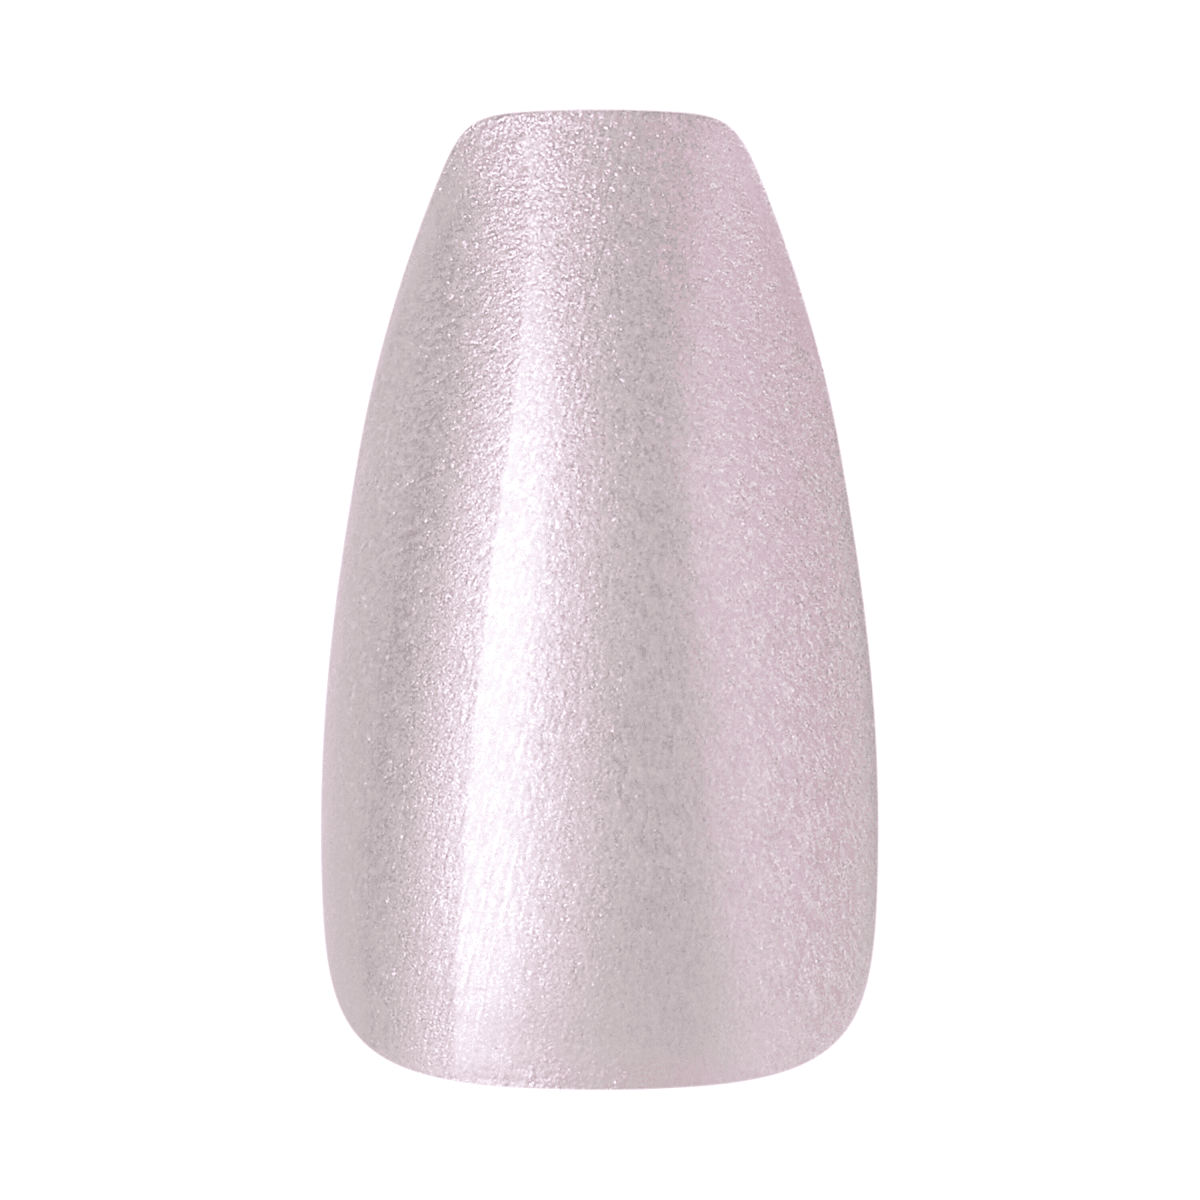 KISS Gel Fantasy Sculpted Holiday Nails - To Sparkle